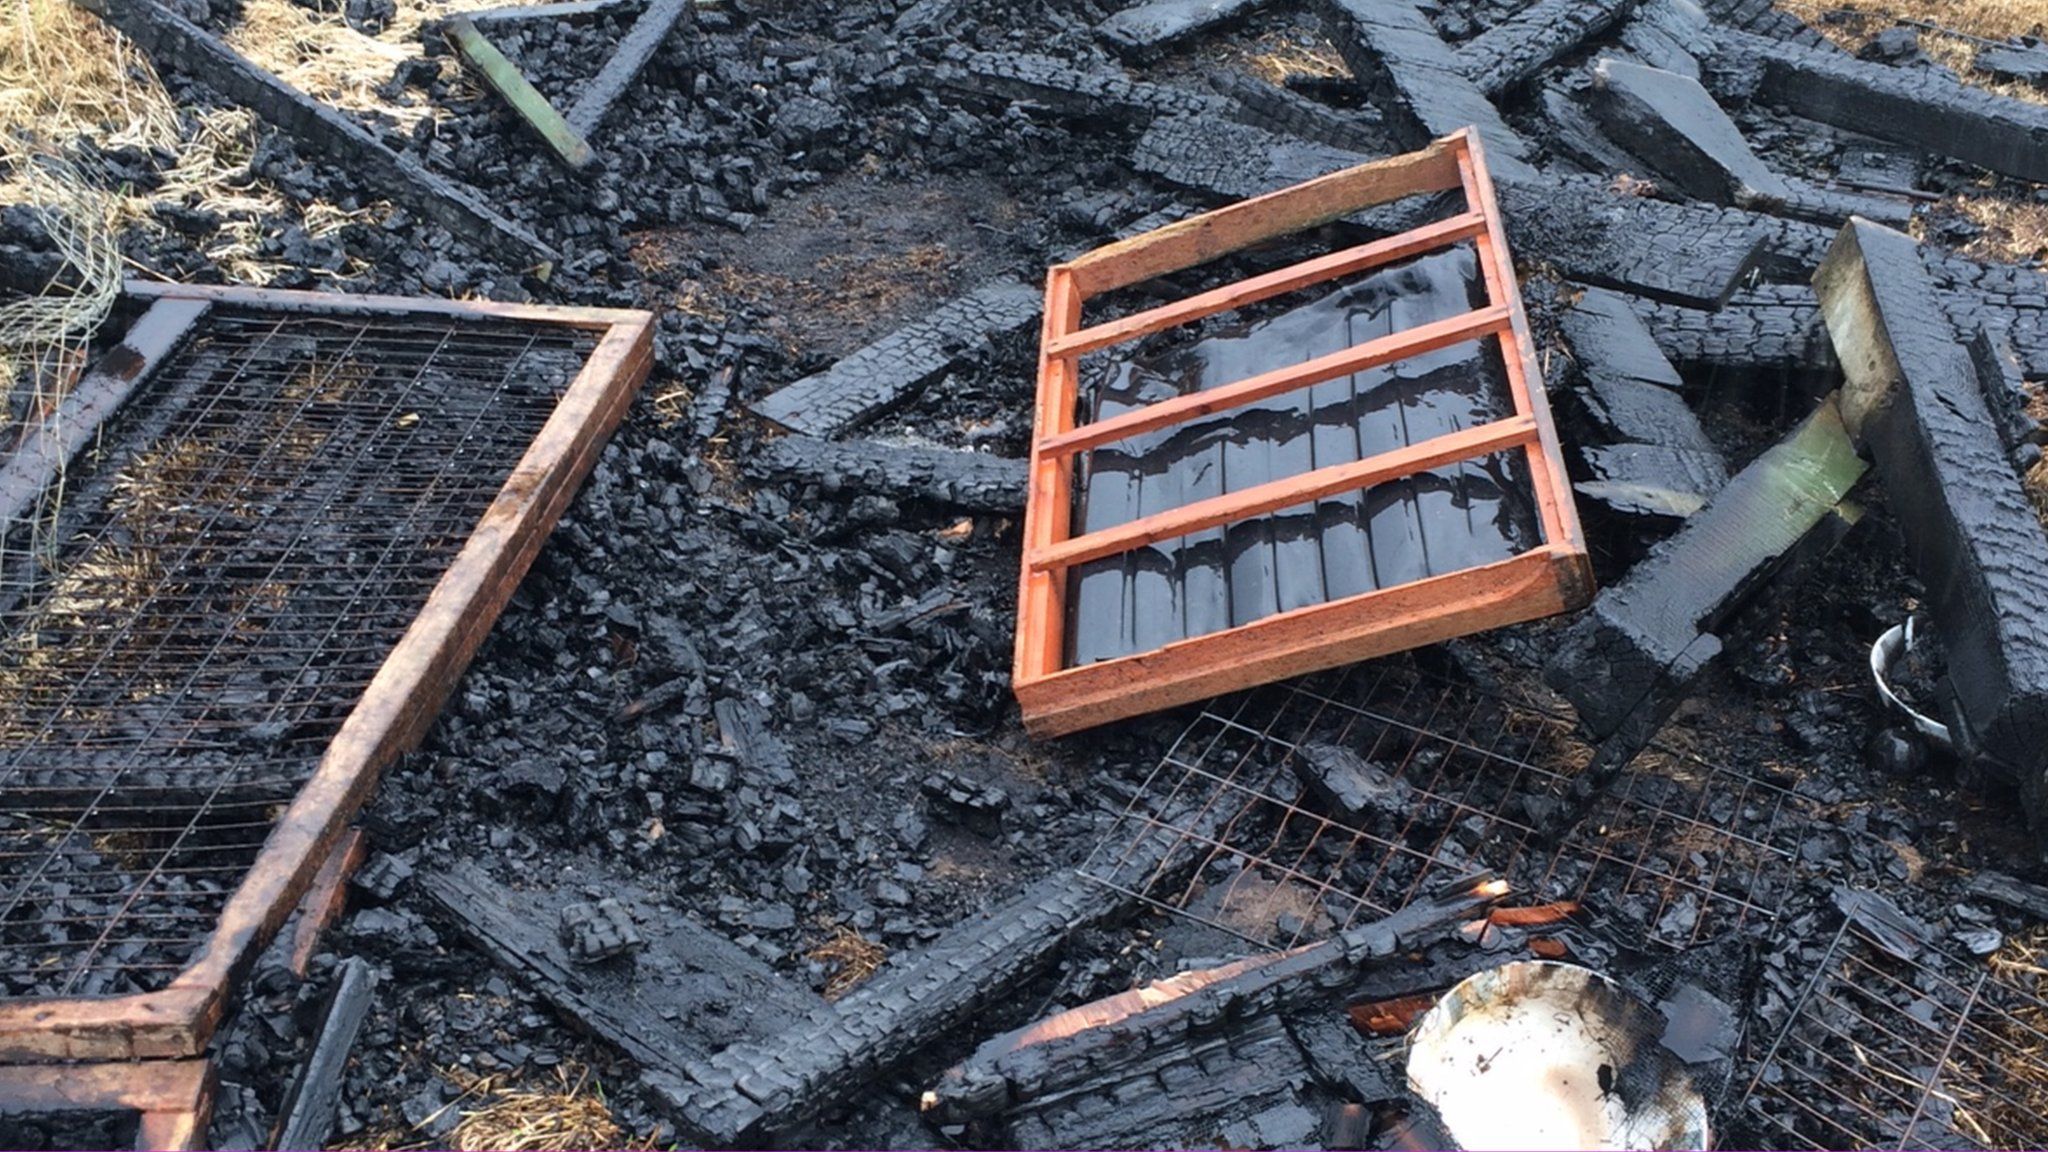 Remains of guinea pig hutch after arson attack